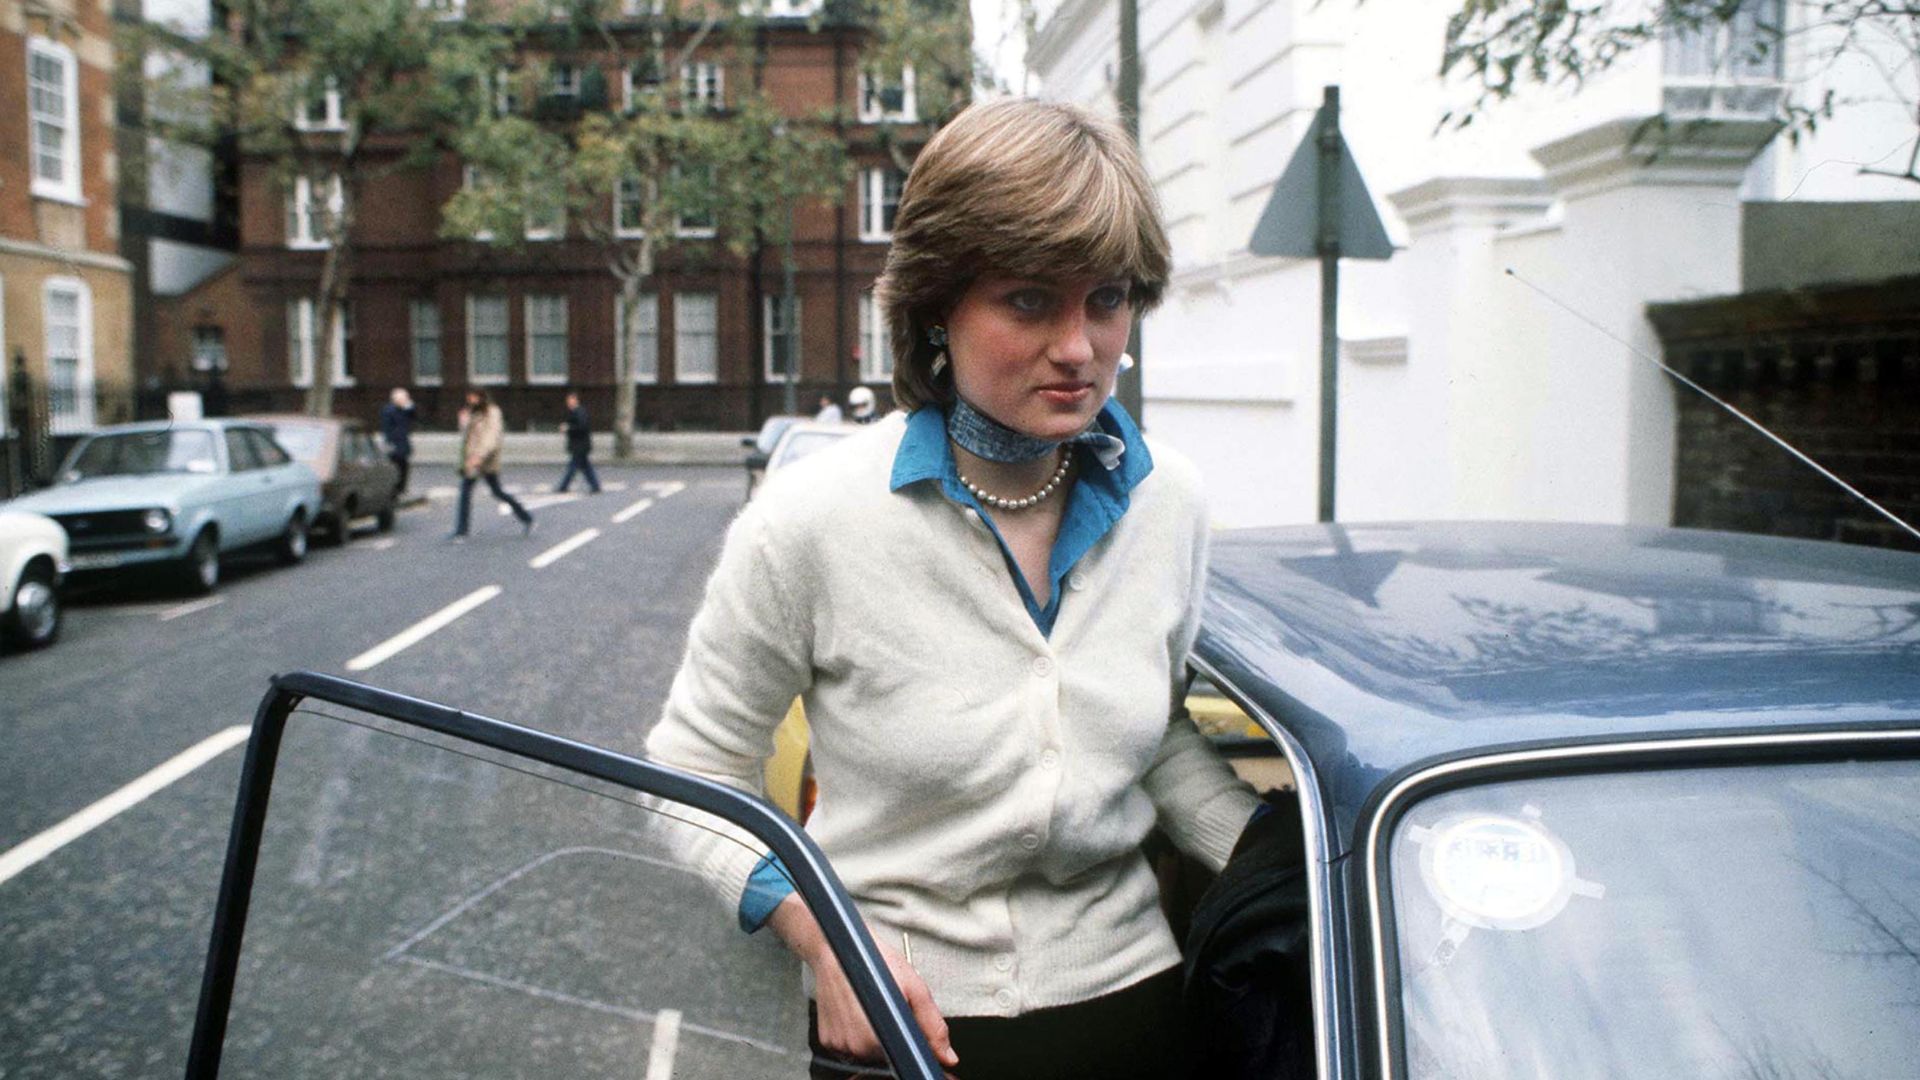 <p>                     Documented as the place Princess Diana was most content, flat 60 in a large apartment block on London’s Old Brompton Road was the princess's home for two years, between 1979 to 1981. Before she married into the Royal Family Diana bought the flat using inheritance money, renting out the spare rooms to friends. According to Andrew Morton’s book Diana, In Her Own Words, Diana described her time at the flat as “the happiest time of her life”.                   </p>